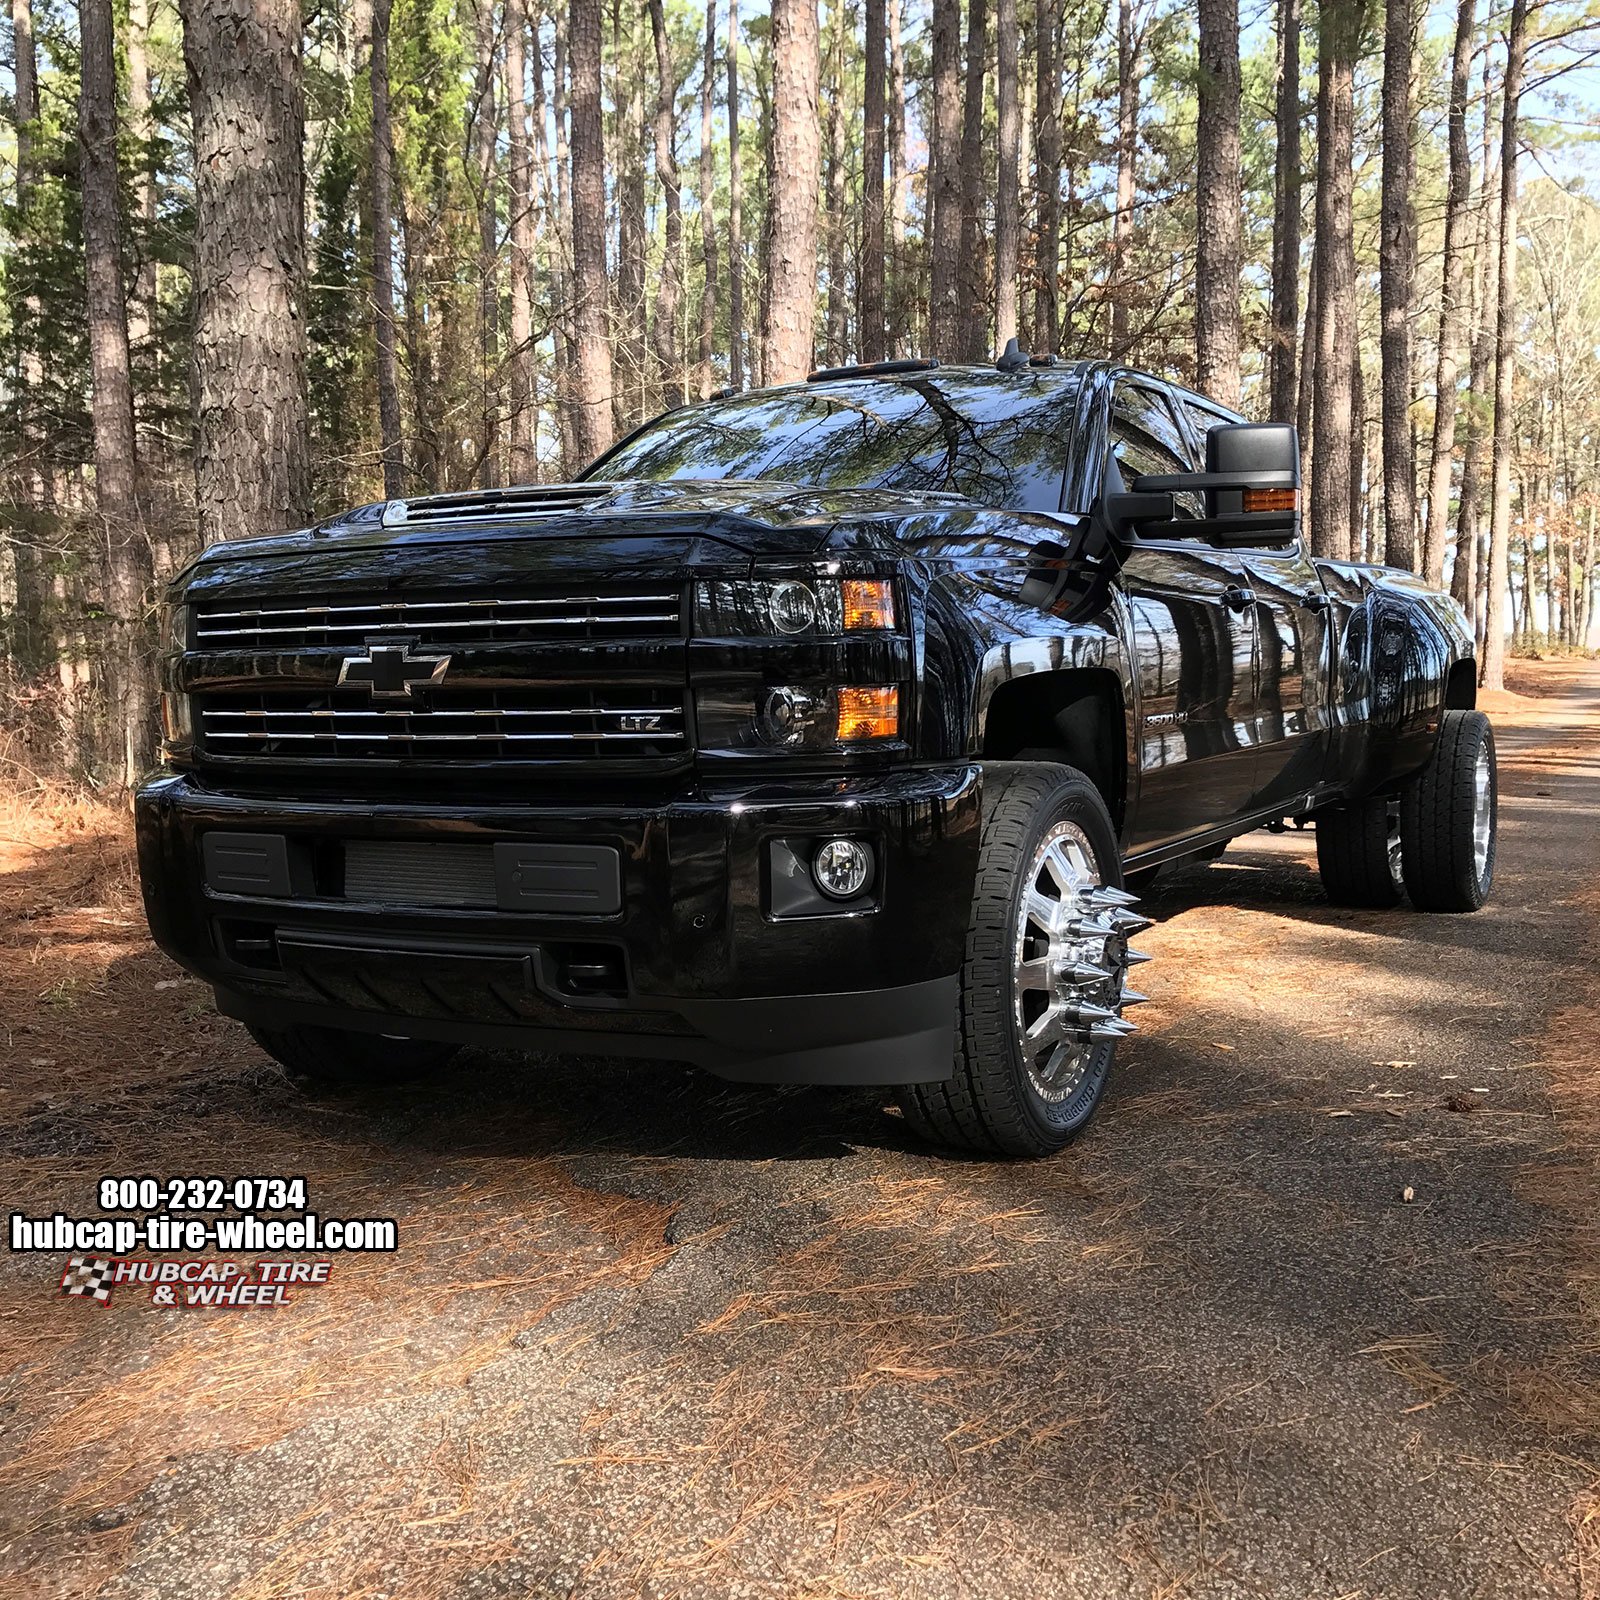 2017 Chevy Silverado 3500 American Force Independence Wheels